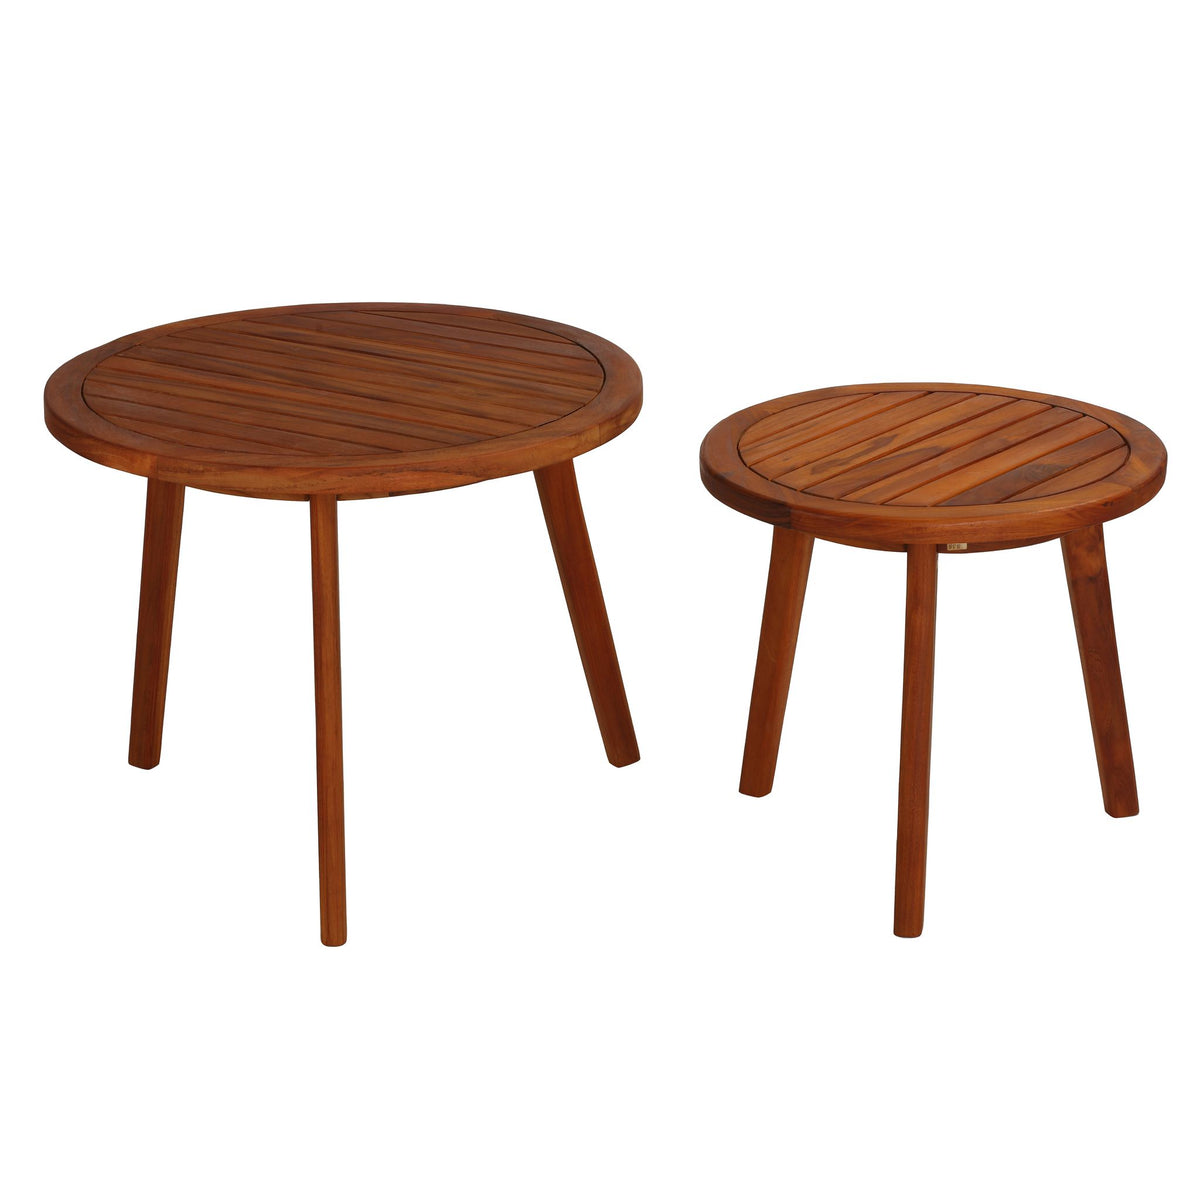 Bare Decor Infinity Teak Accent Nesting Tables, Round Solid Wood